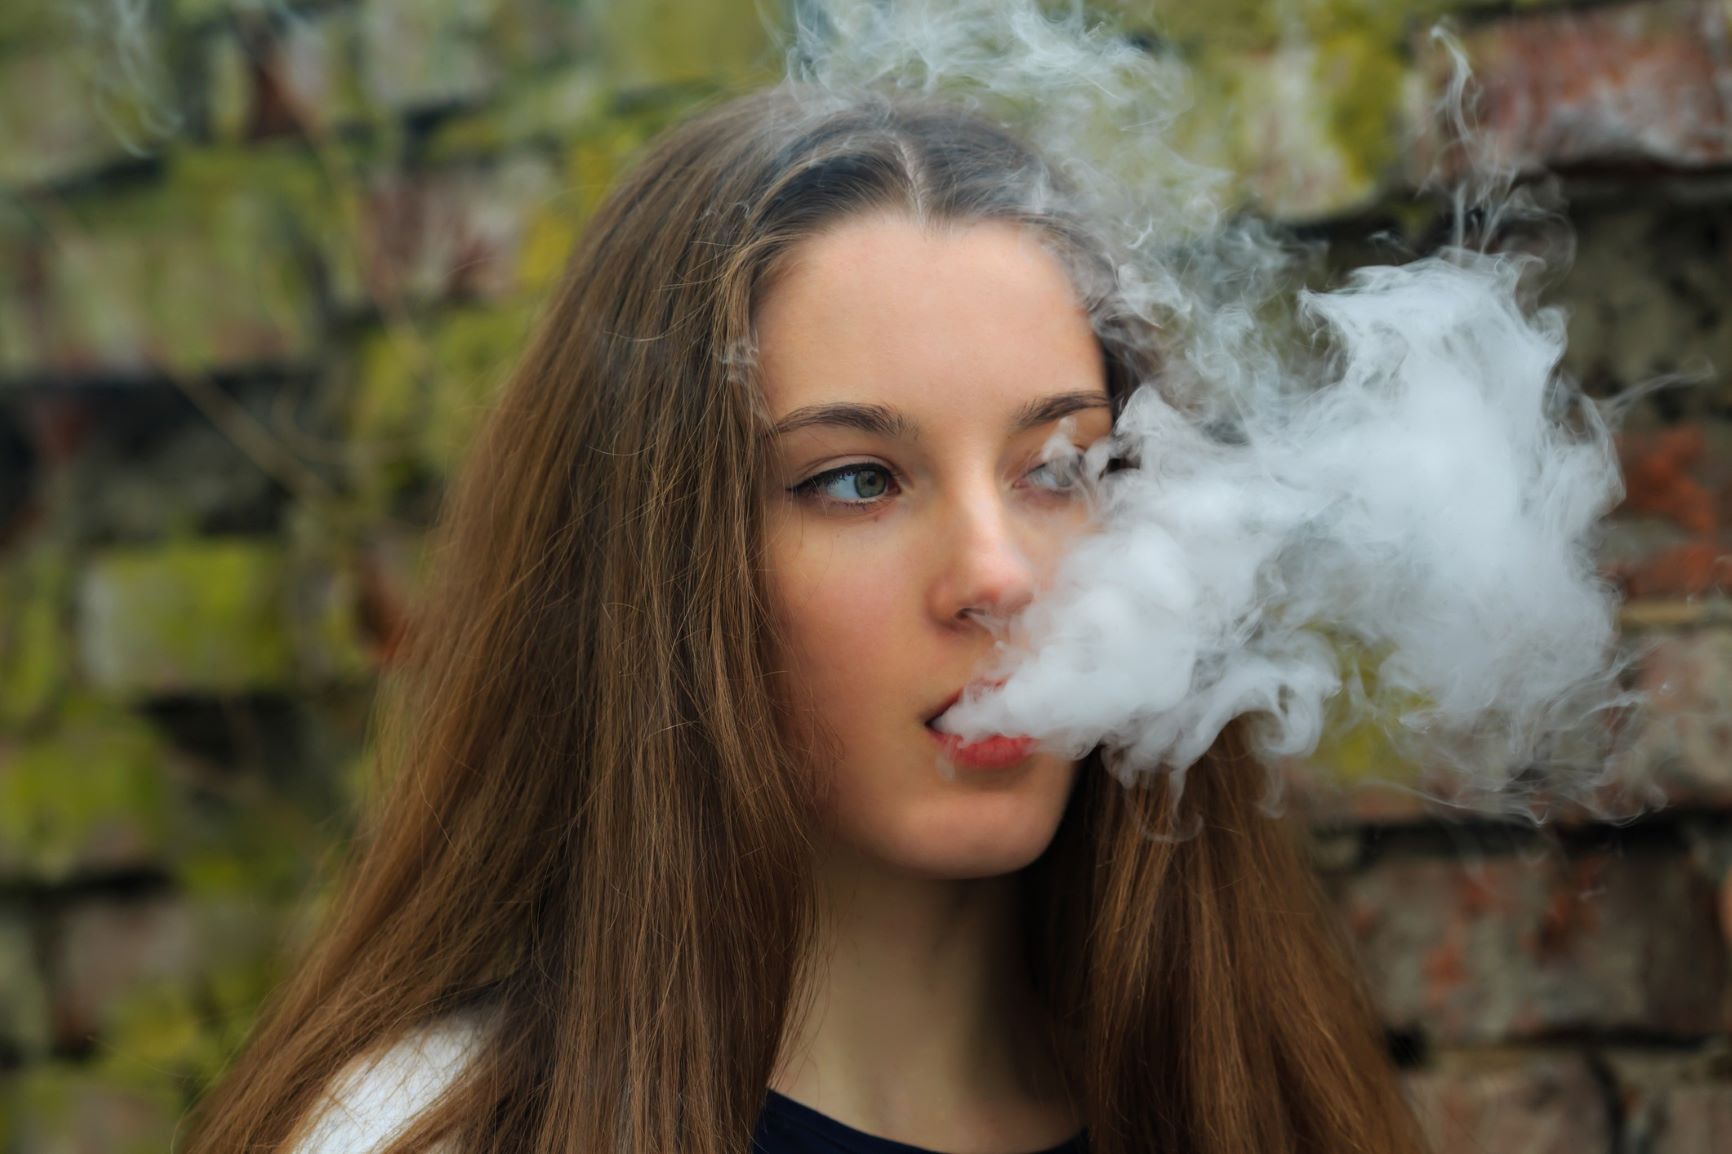 A young person vaping